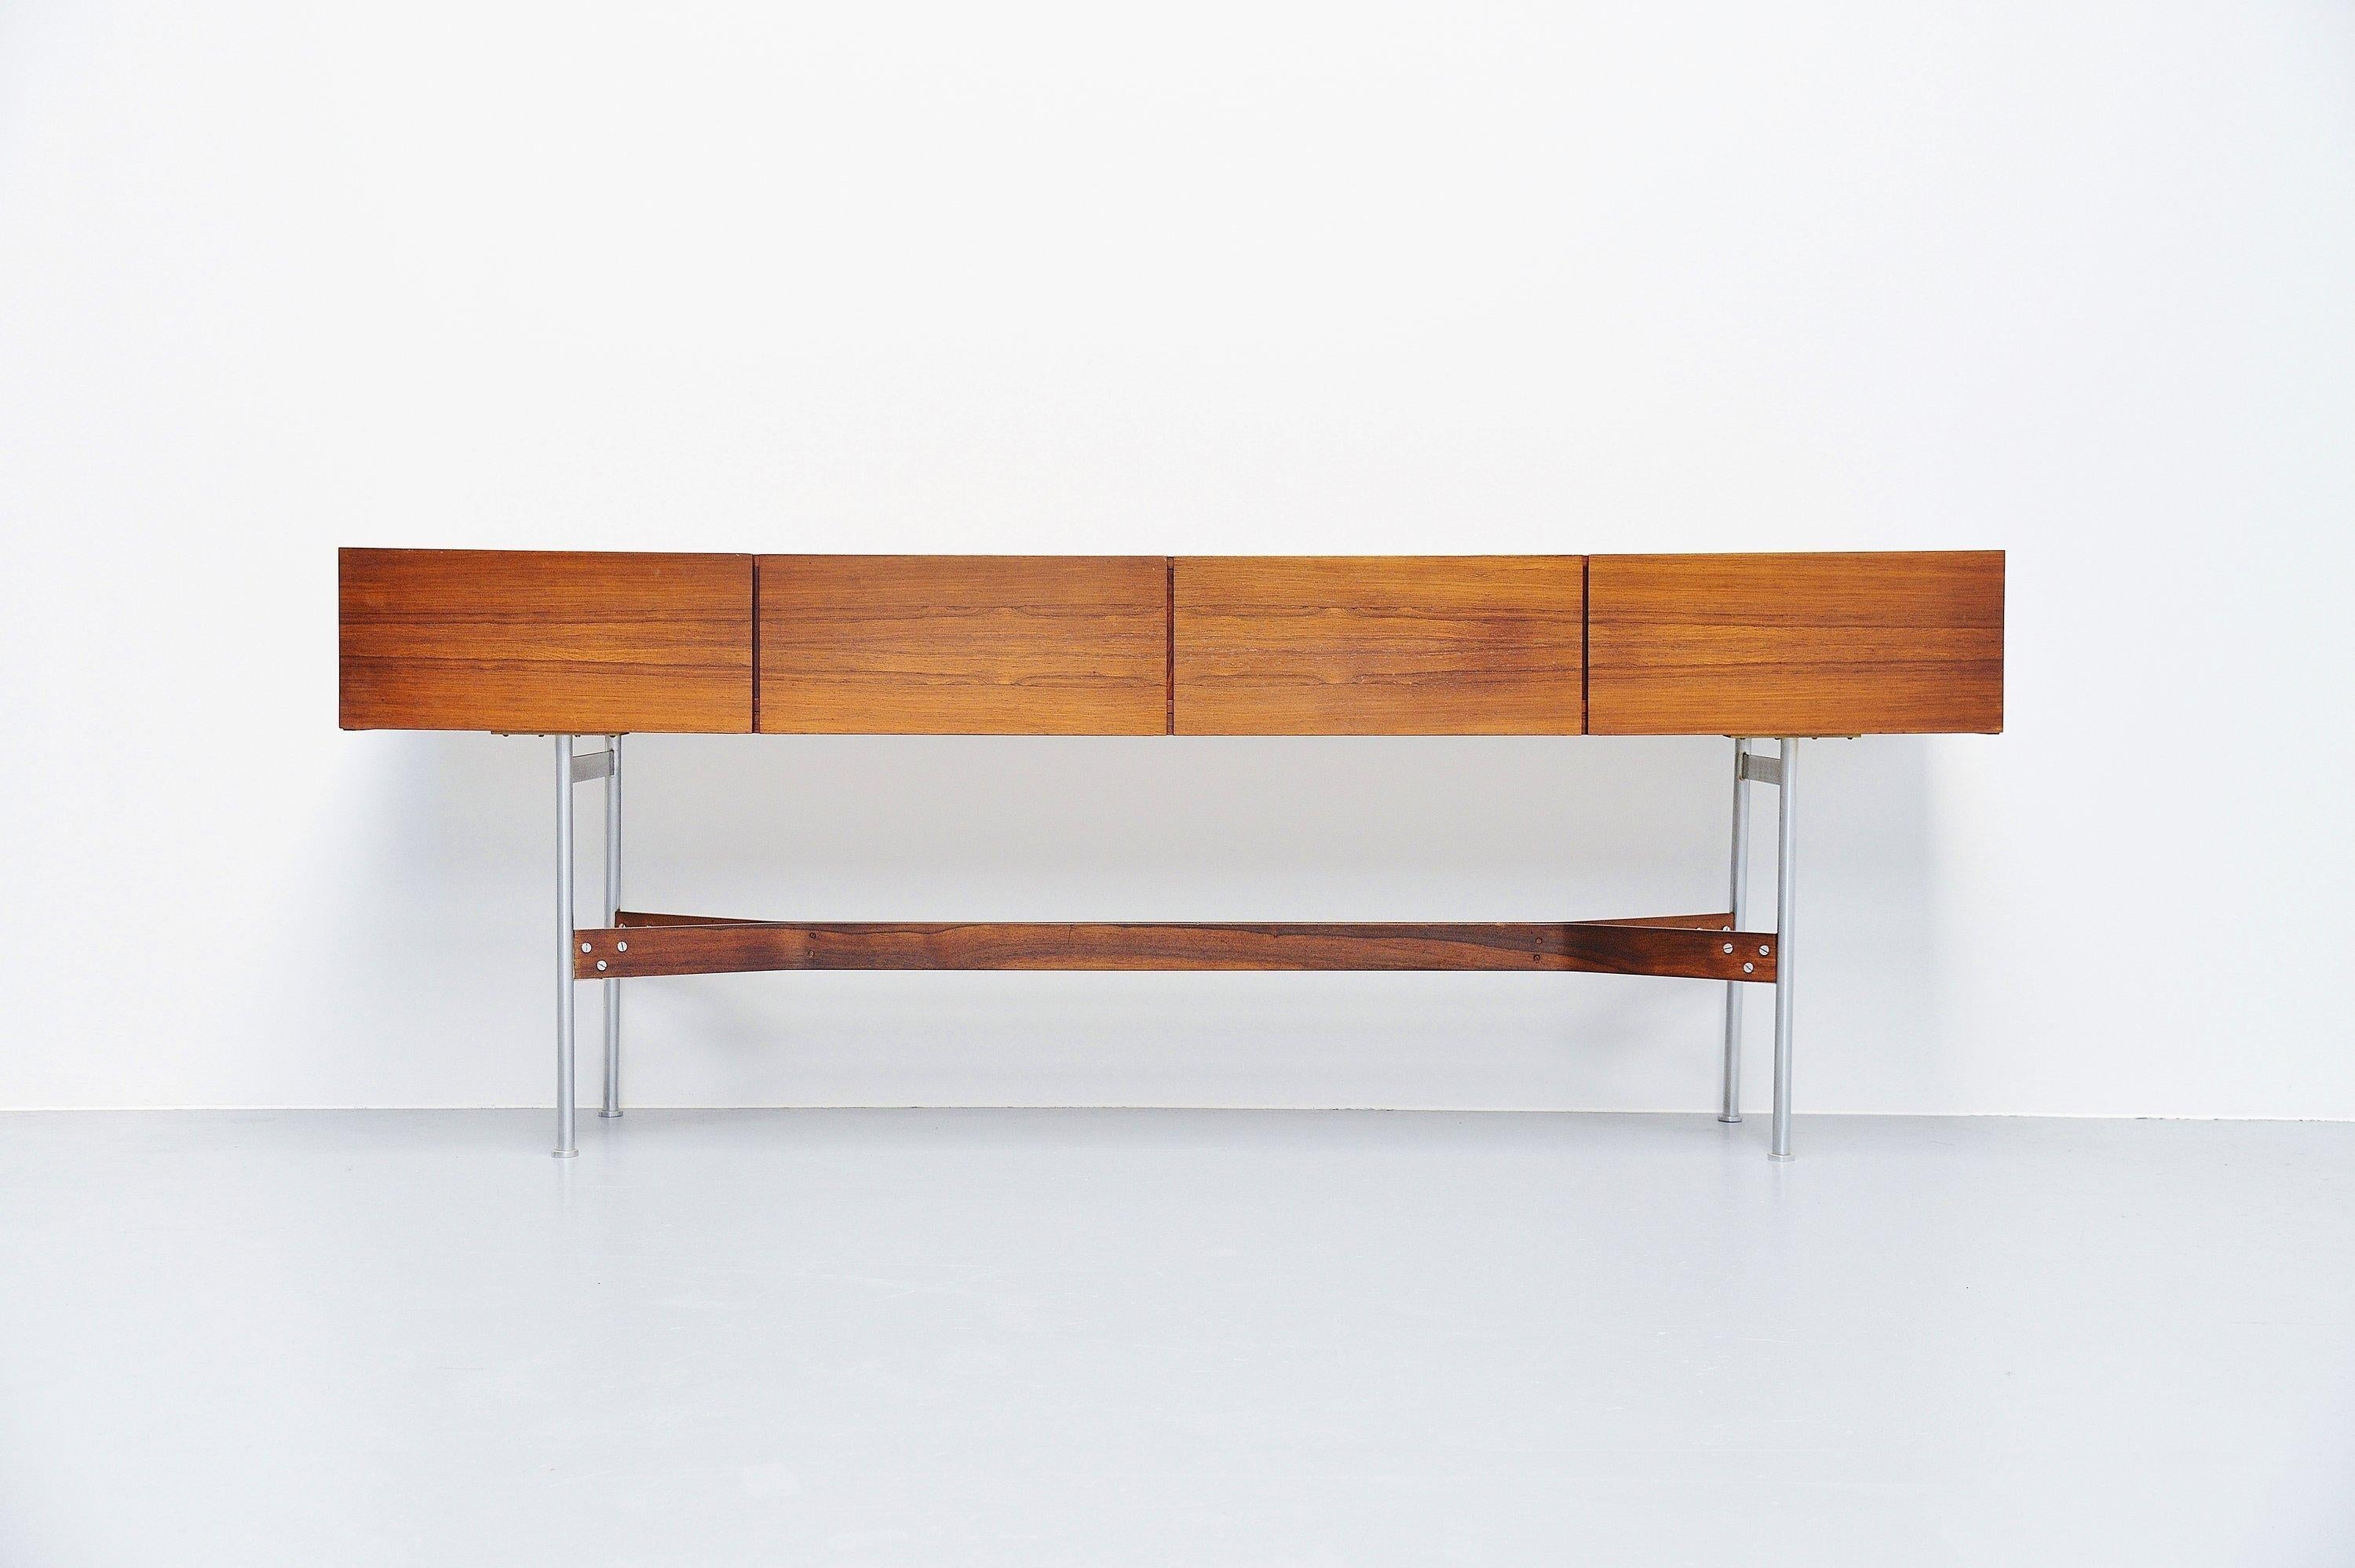 Highly sophisticated and unique custom made sideboard model GLR-230 designed by Rudolf Bernd Glatzel and manufactured by Fristho Franeker, Holland, 1962. This super refined completely finished double sided sideboard is made of nicely warm grained